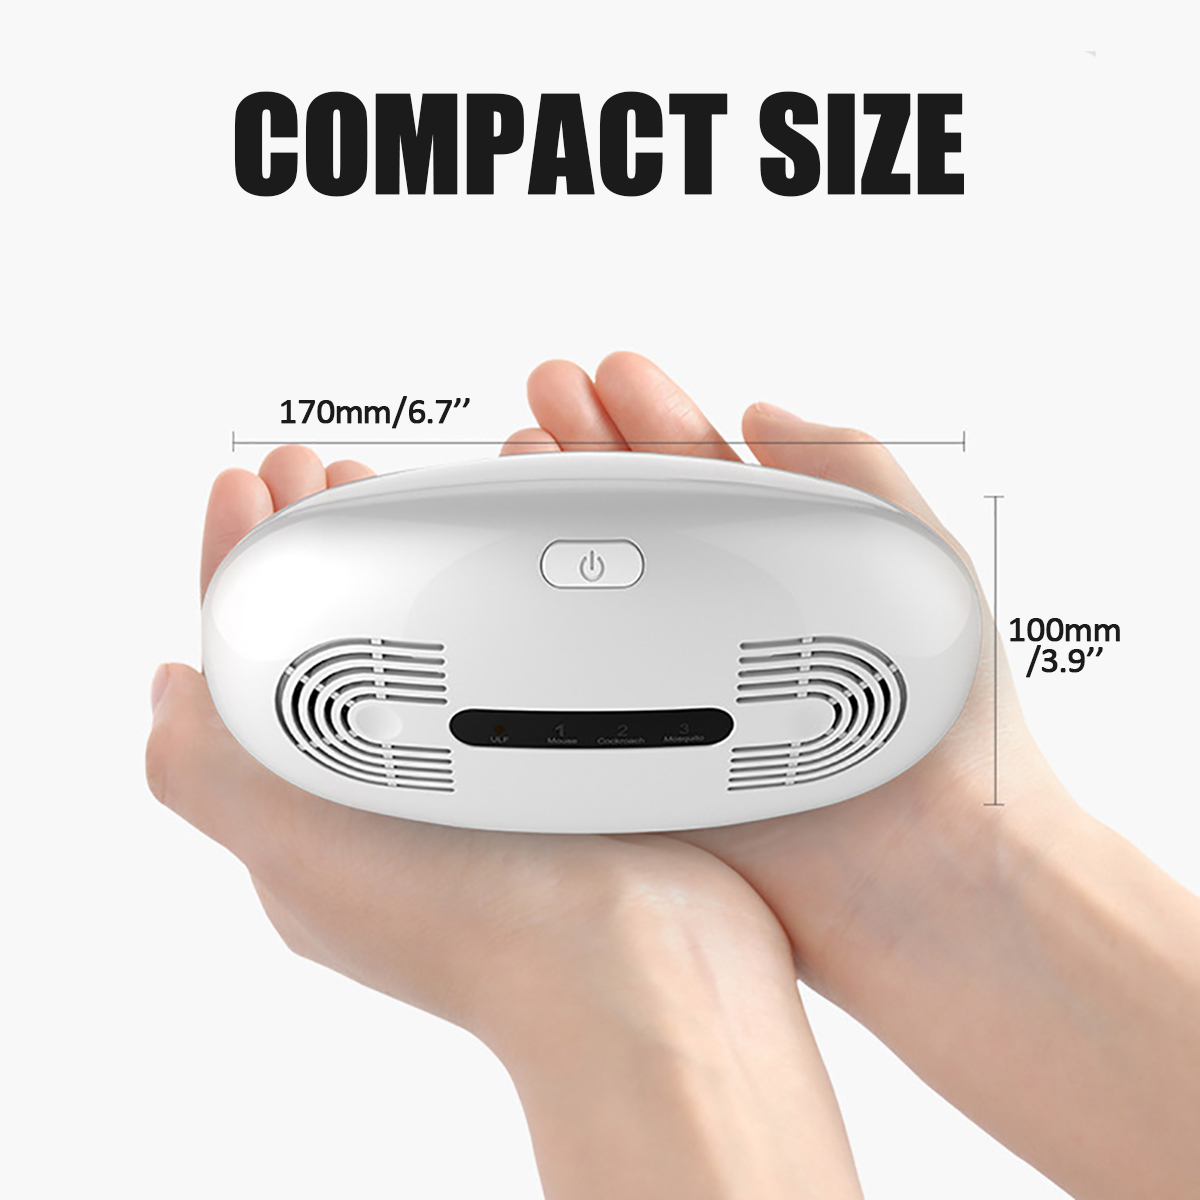 220V-Ultrasonic-Pest-Dispeller-Repeller-Control-Electronic-Fly-Rat-Mosquito-Rodent-Insect-Bug-Killer-1521853-2